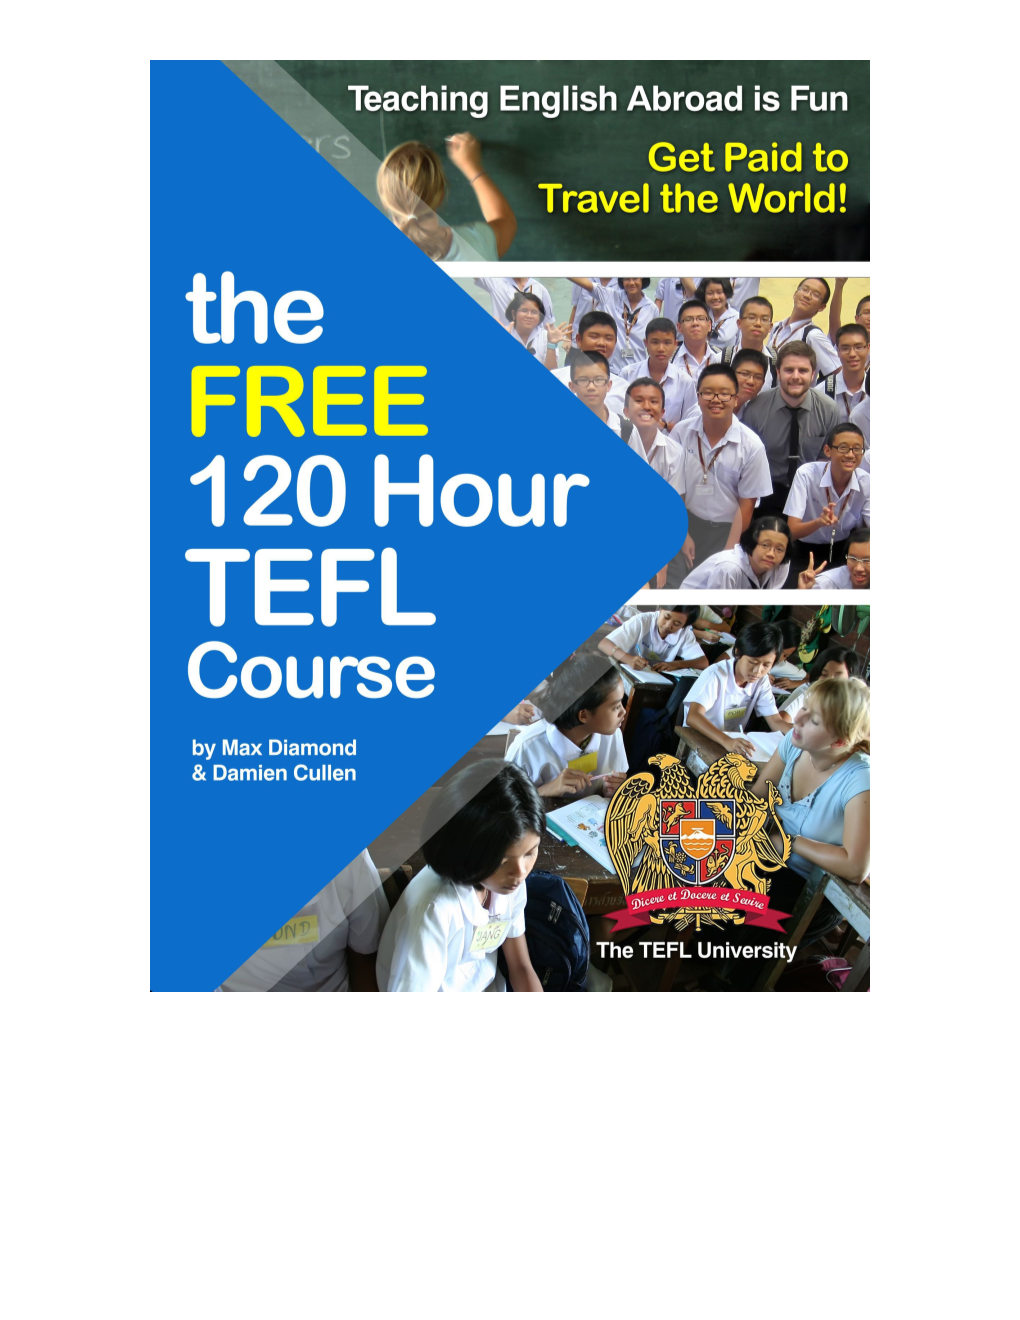 The Free 12 Hour TEFL Course